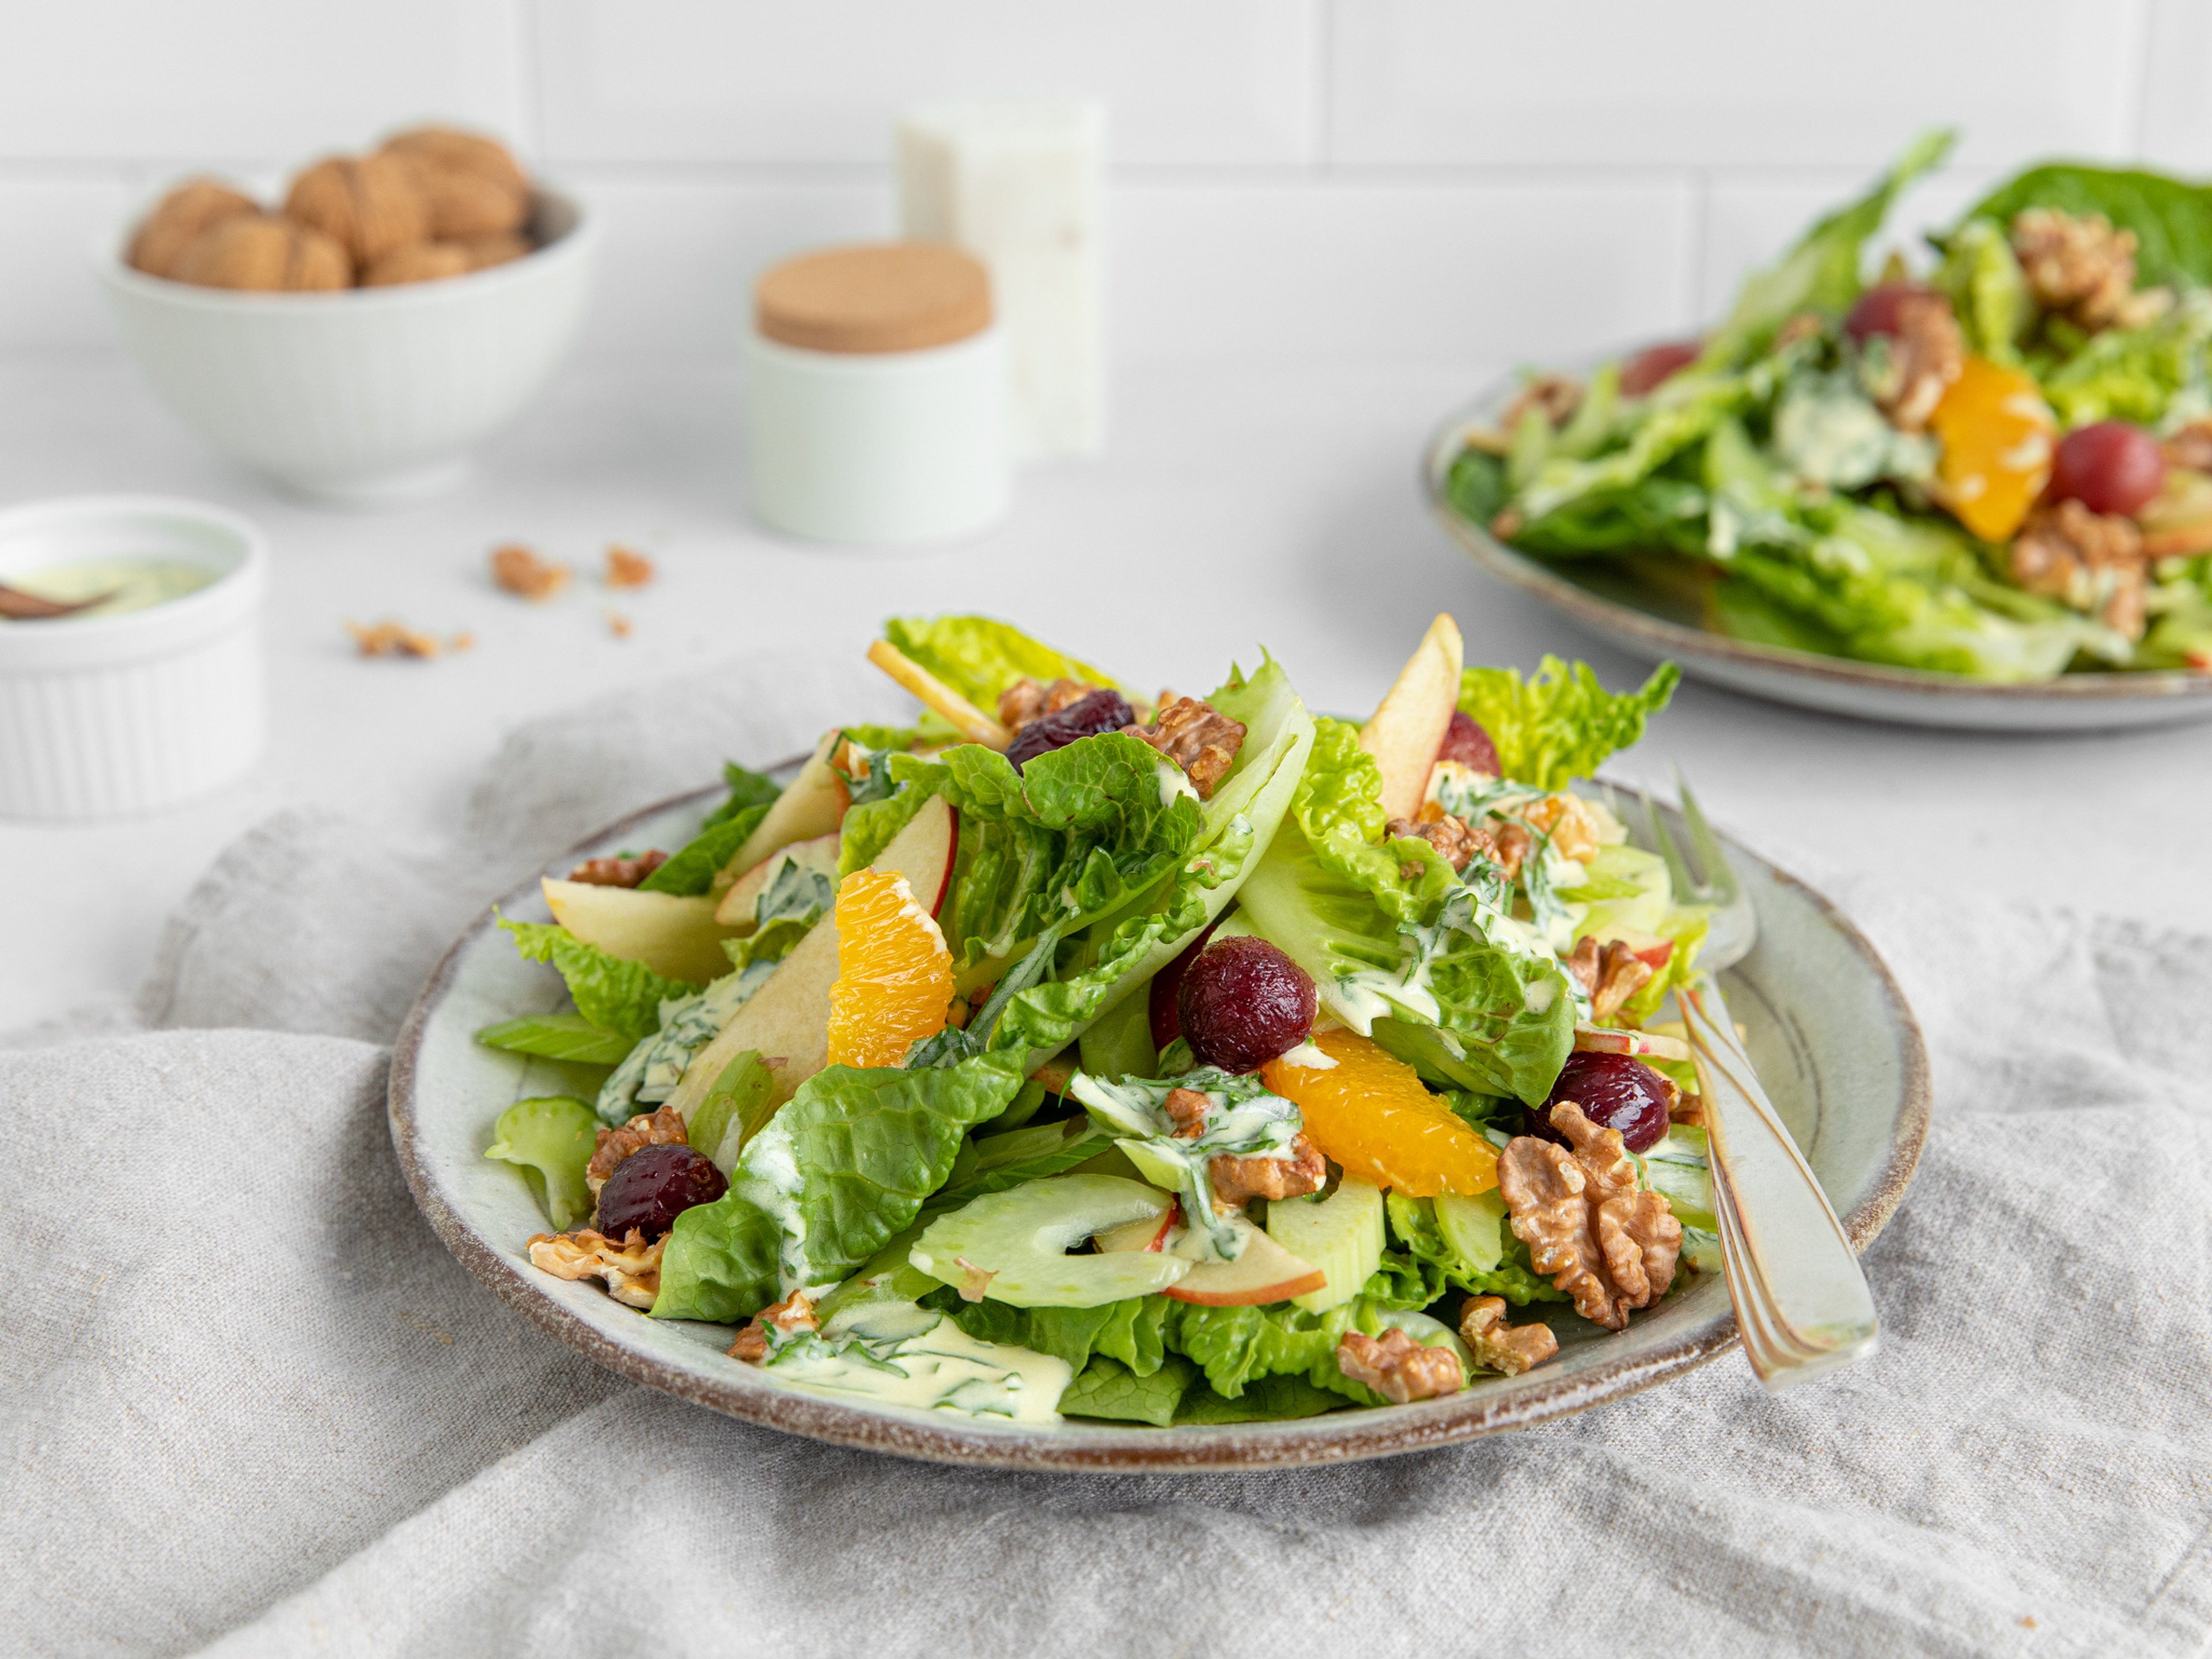 Light Waldorf salad with caramelized grapes